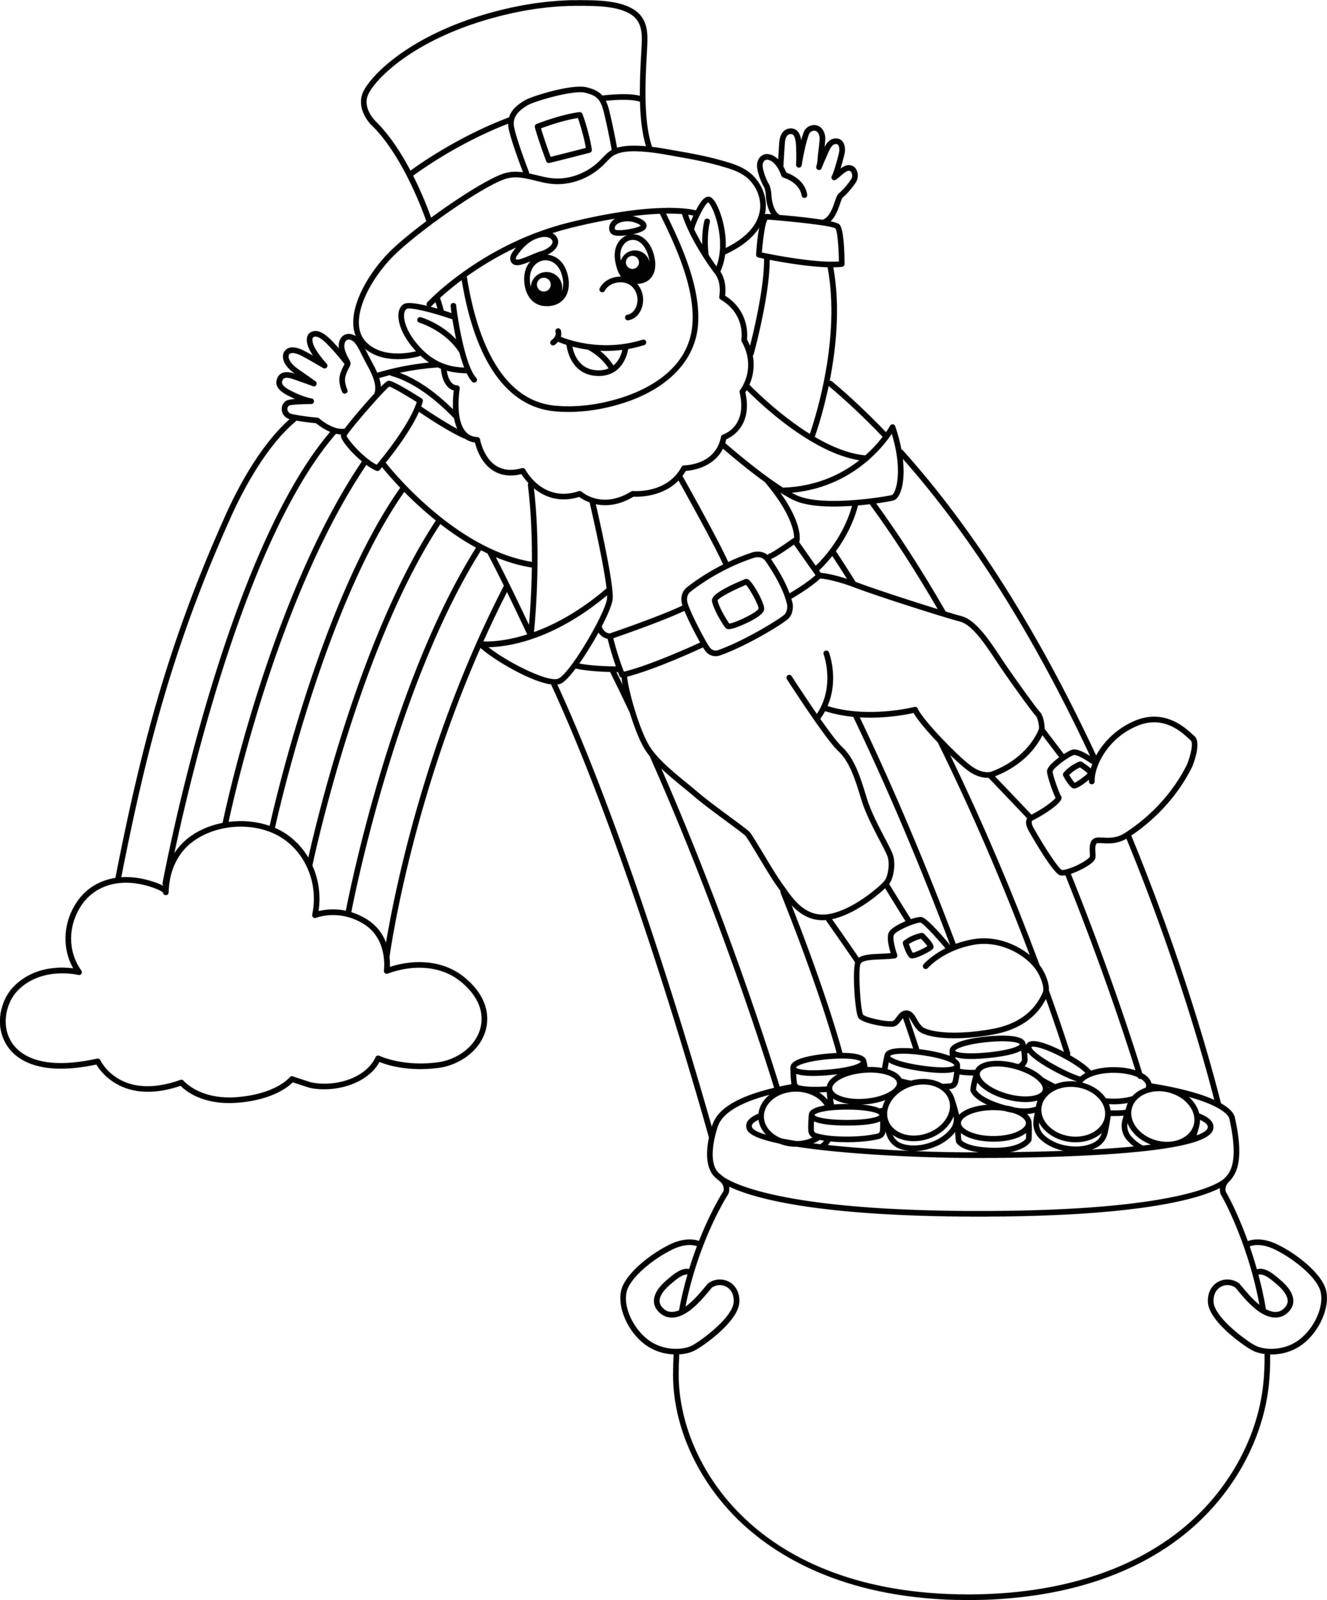 A cute and funny coloring page of a St. Patricks Day leprechaun on a rainbow. Provides hours of coloring fun for children. To color, this page is very easy. Suitable for little kids and toddlers.